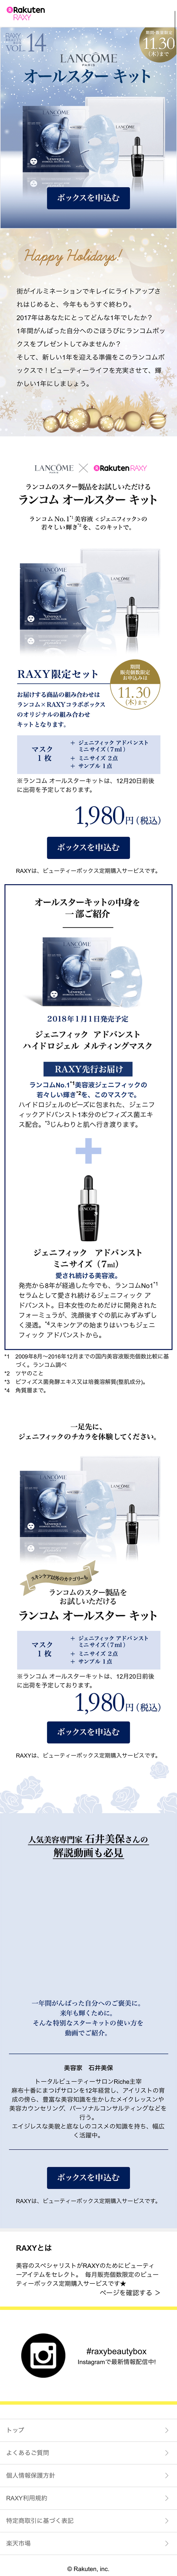 LANCOME オールスターキット_sp_1